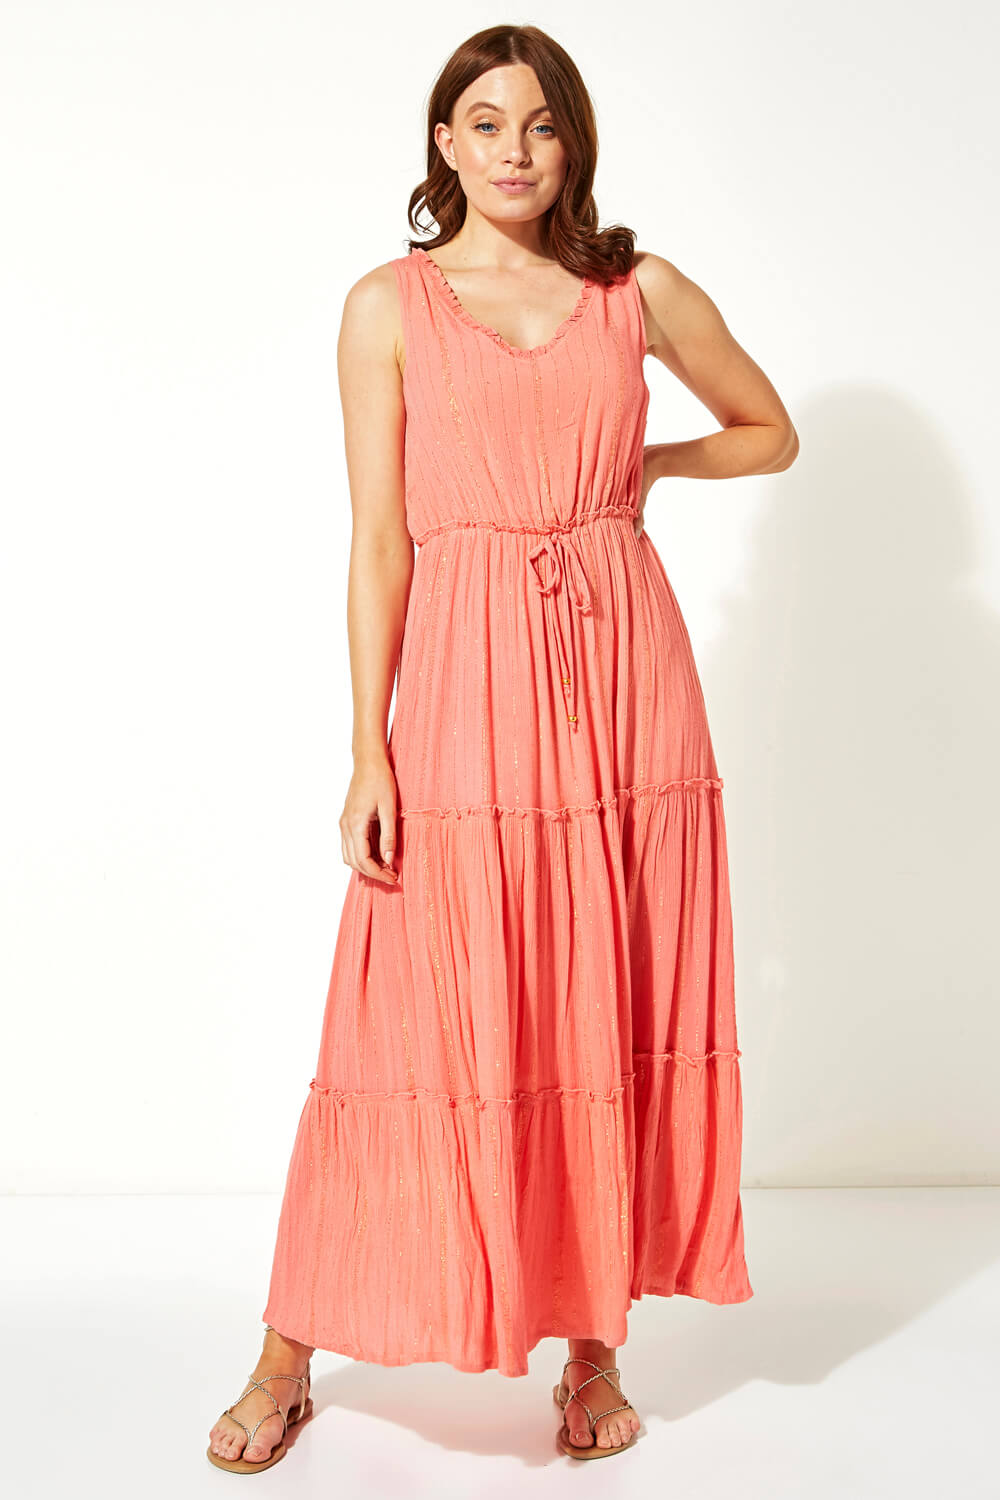 CORAL Tiered Tie Waist Maxi Dress , Image 3 of 4